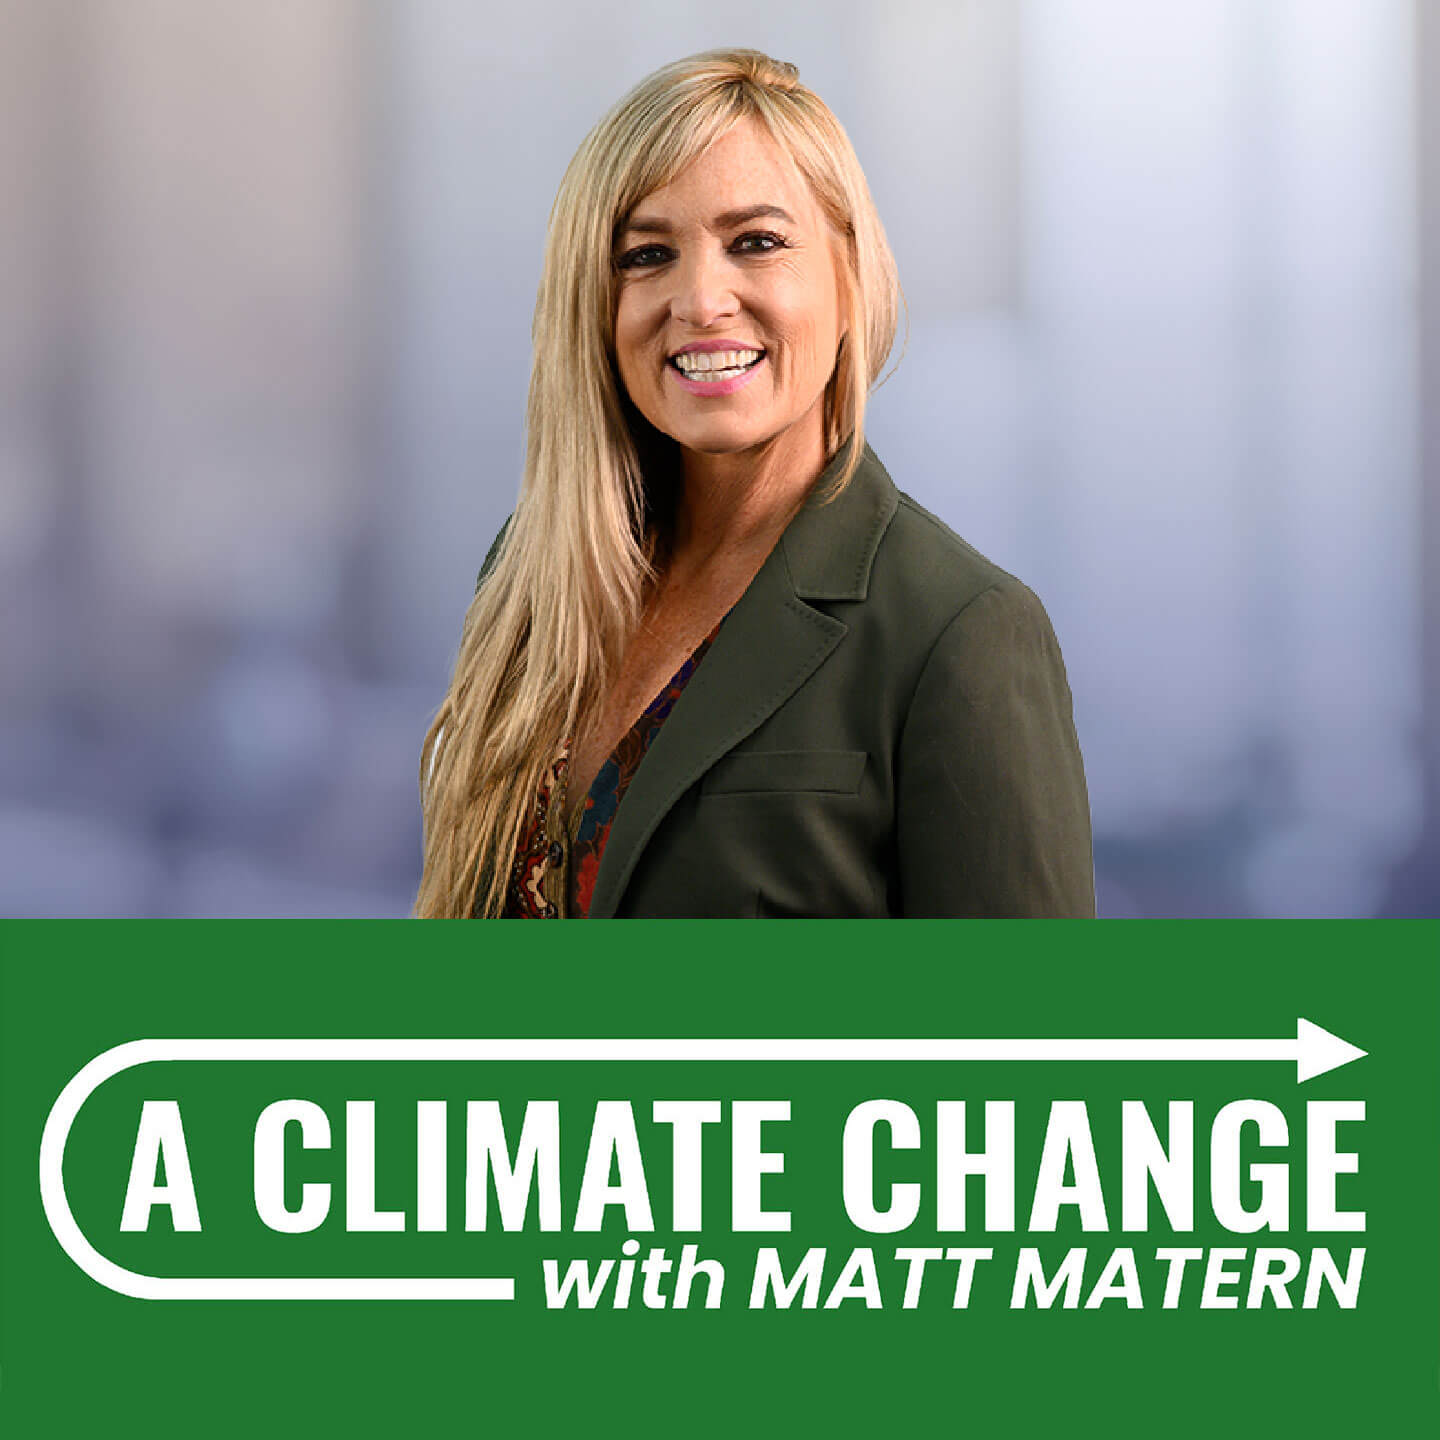 123: Dynamic Attorney Melissa Sims Takes On Big Oil